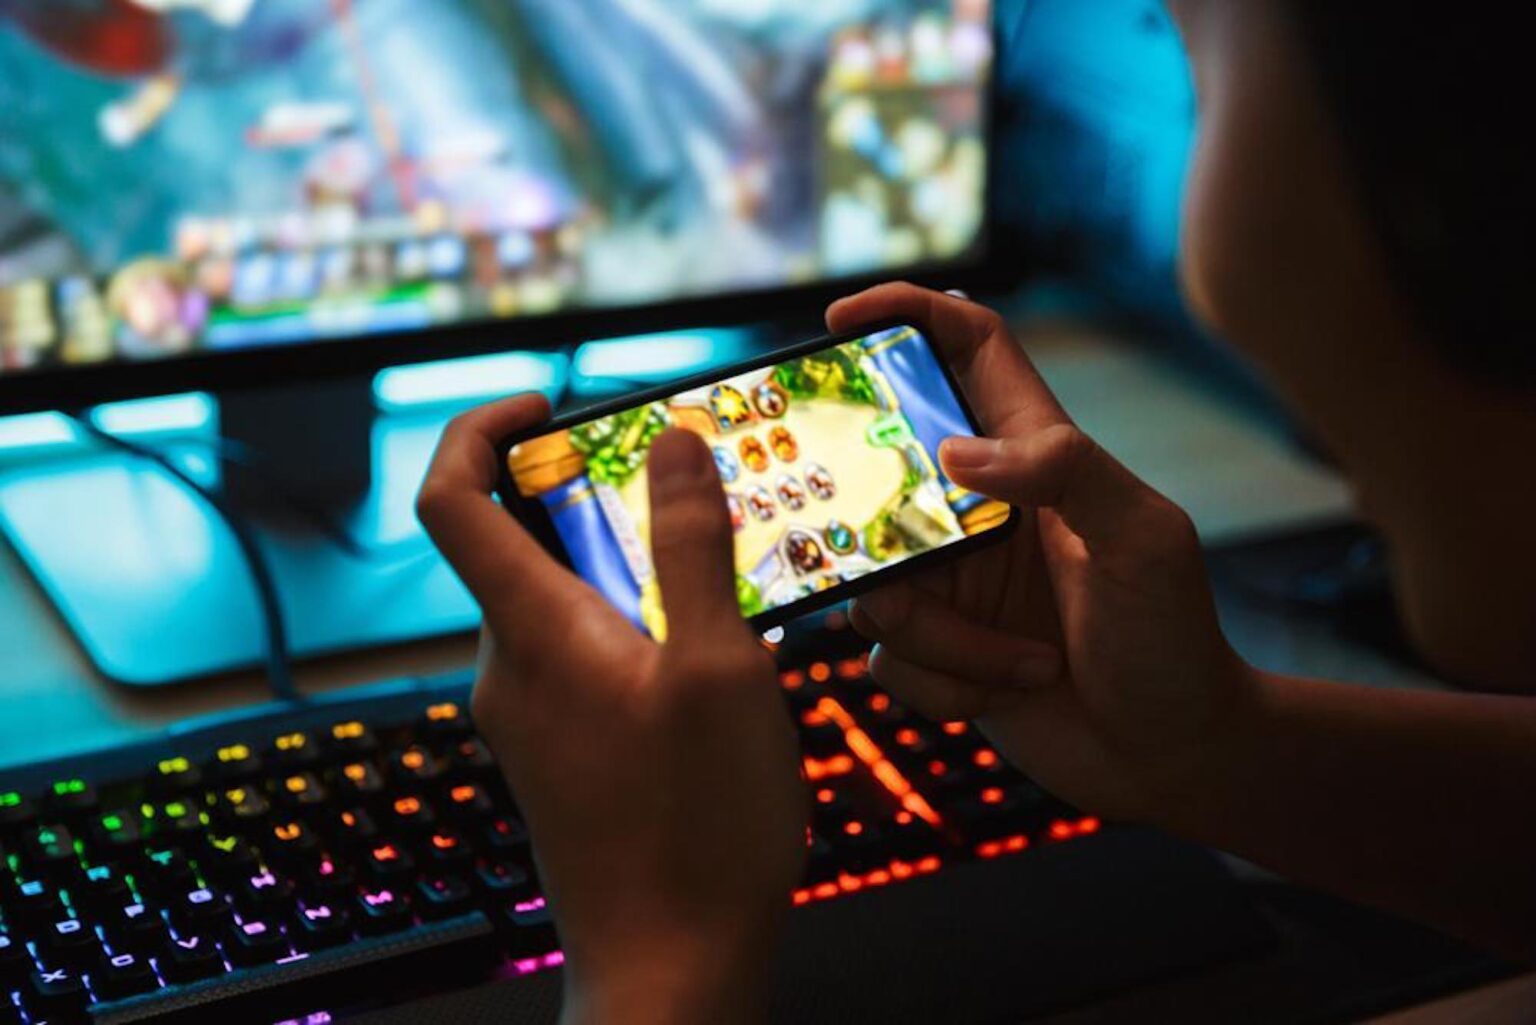 Need something to keep you occupied on lockdown? Here are the best online games to play on your phone – and they're free!